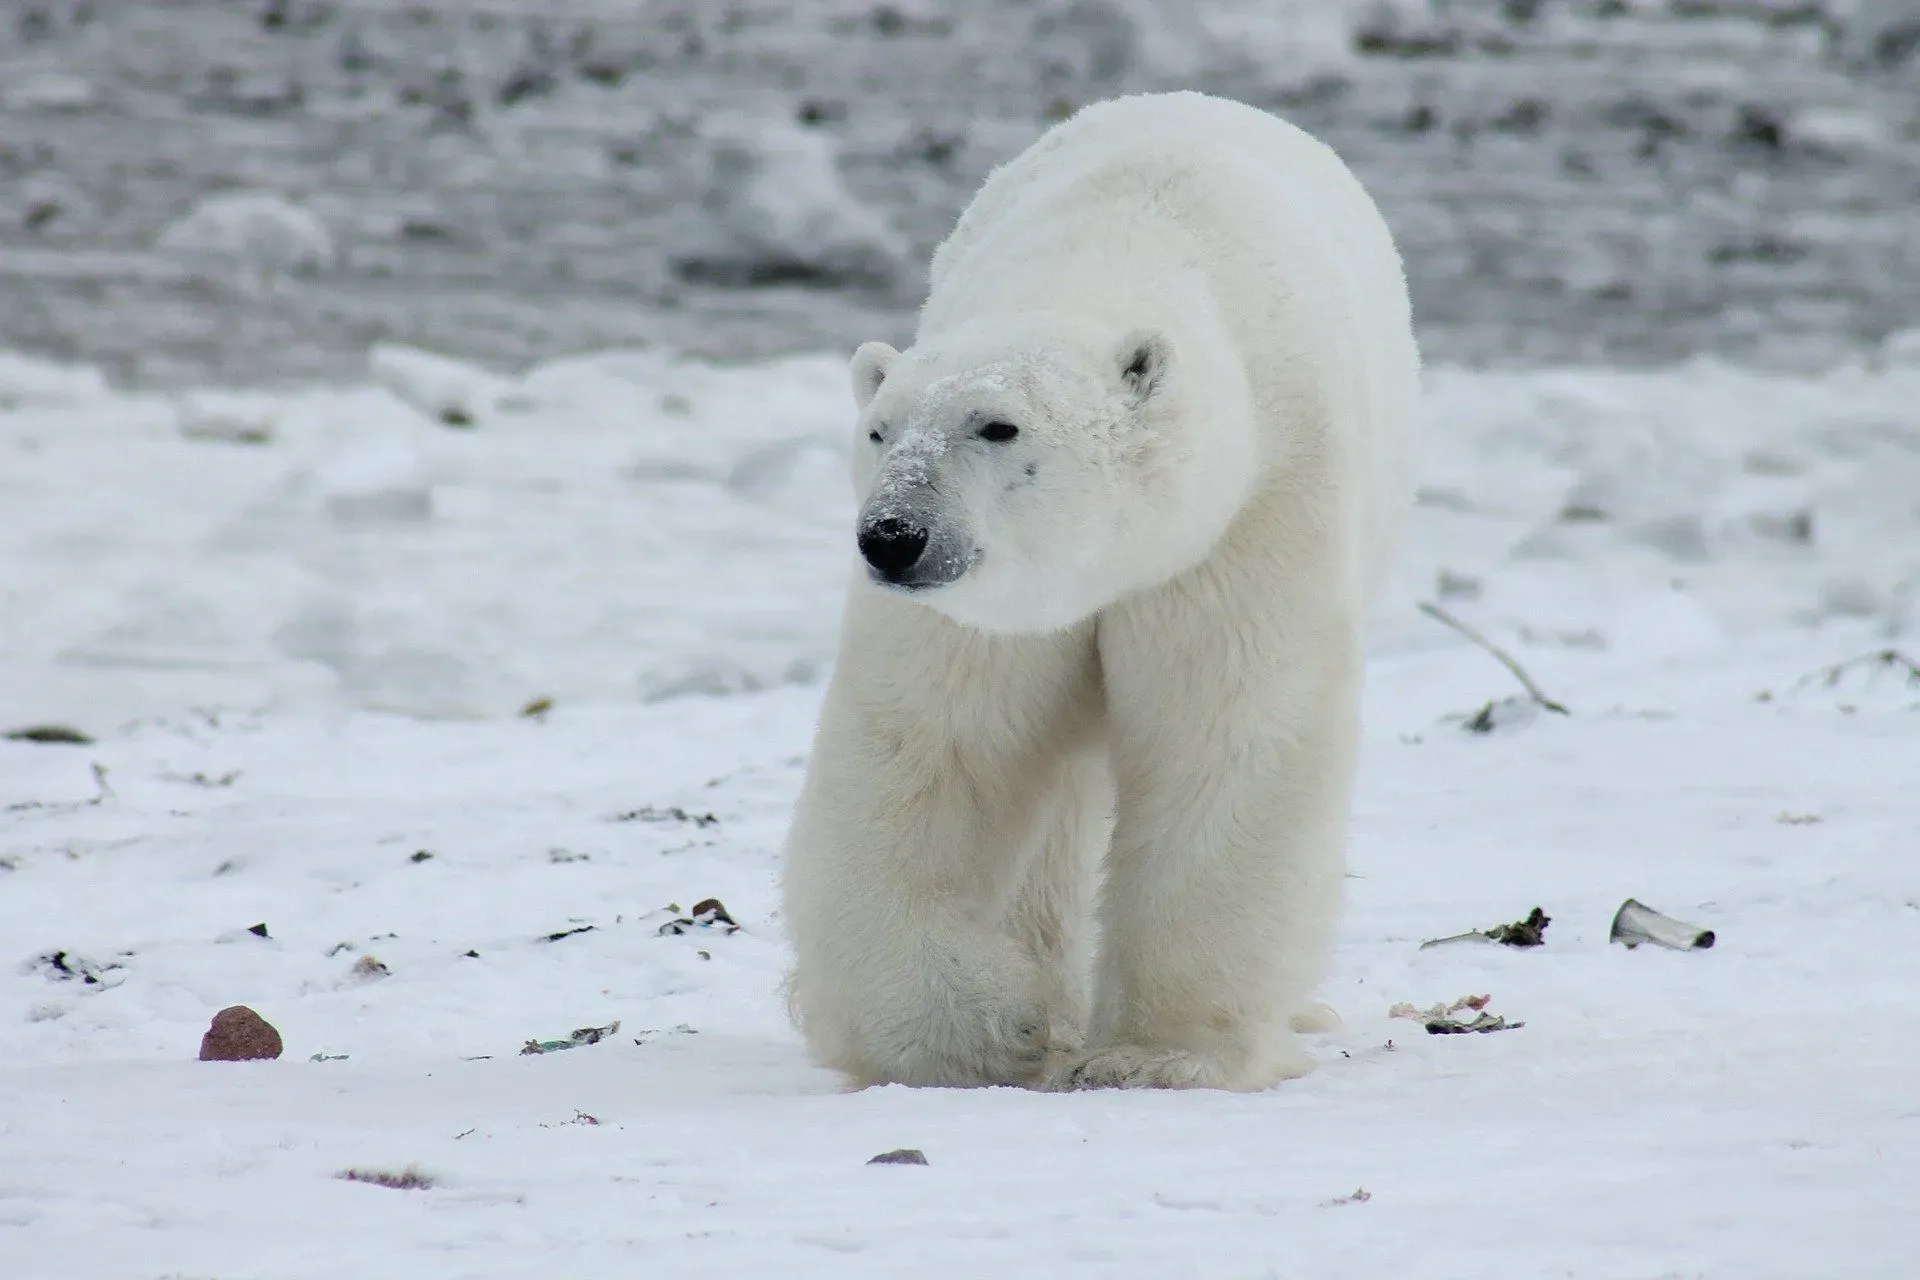 Do polar bears hibernate? Find out in this article.